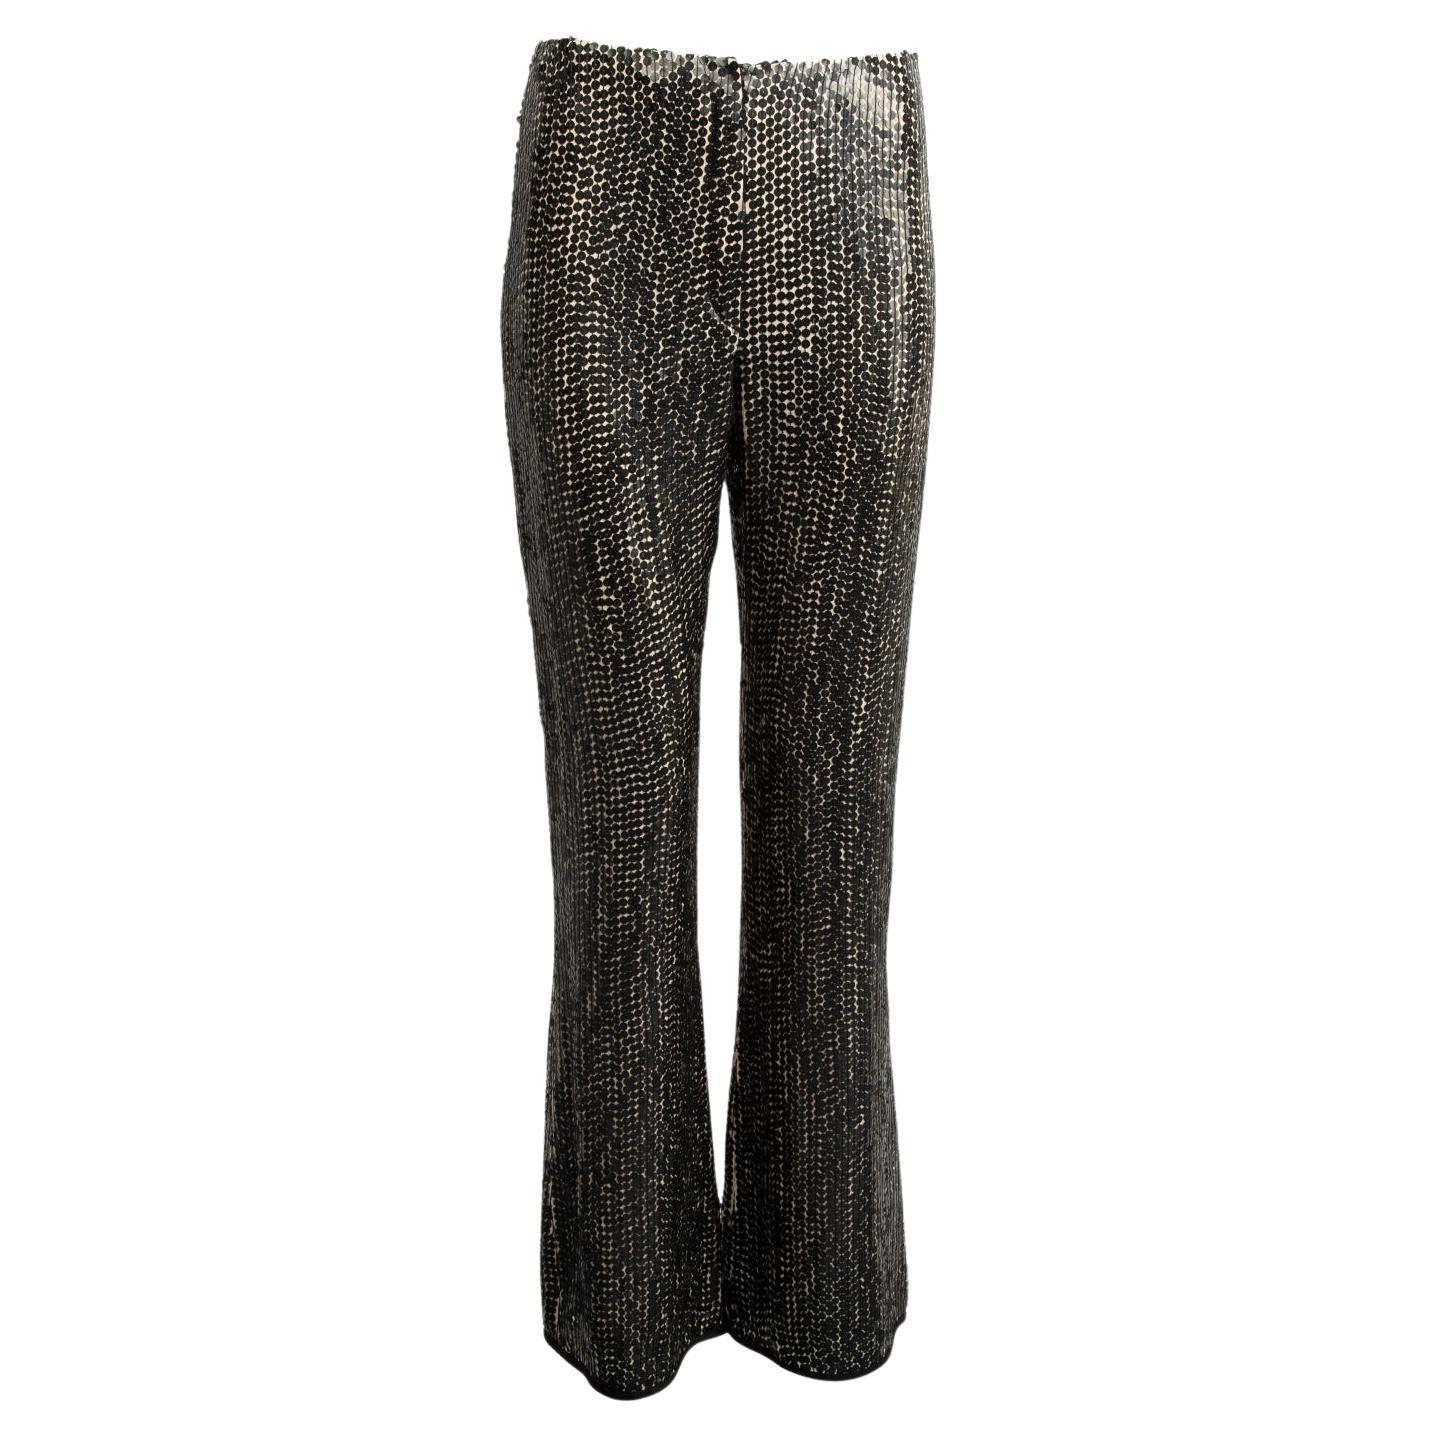 Pre-Loved Givenchy Women's Glitter Trousers